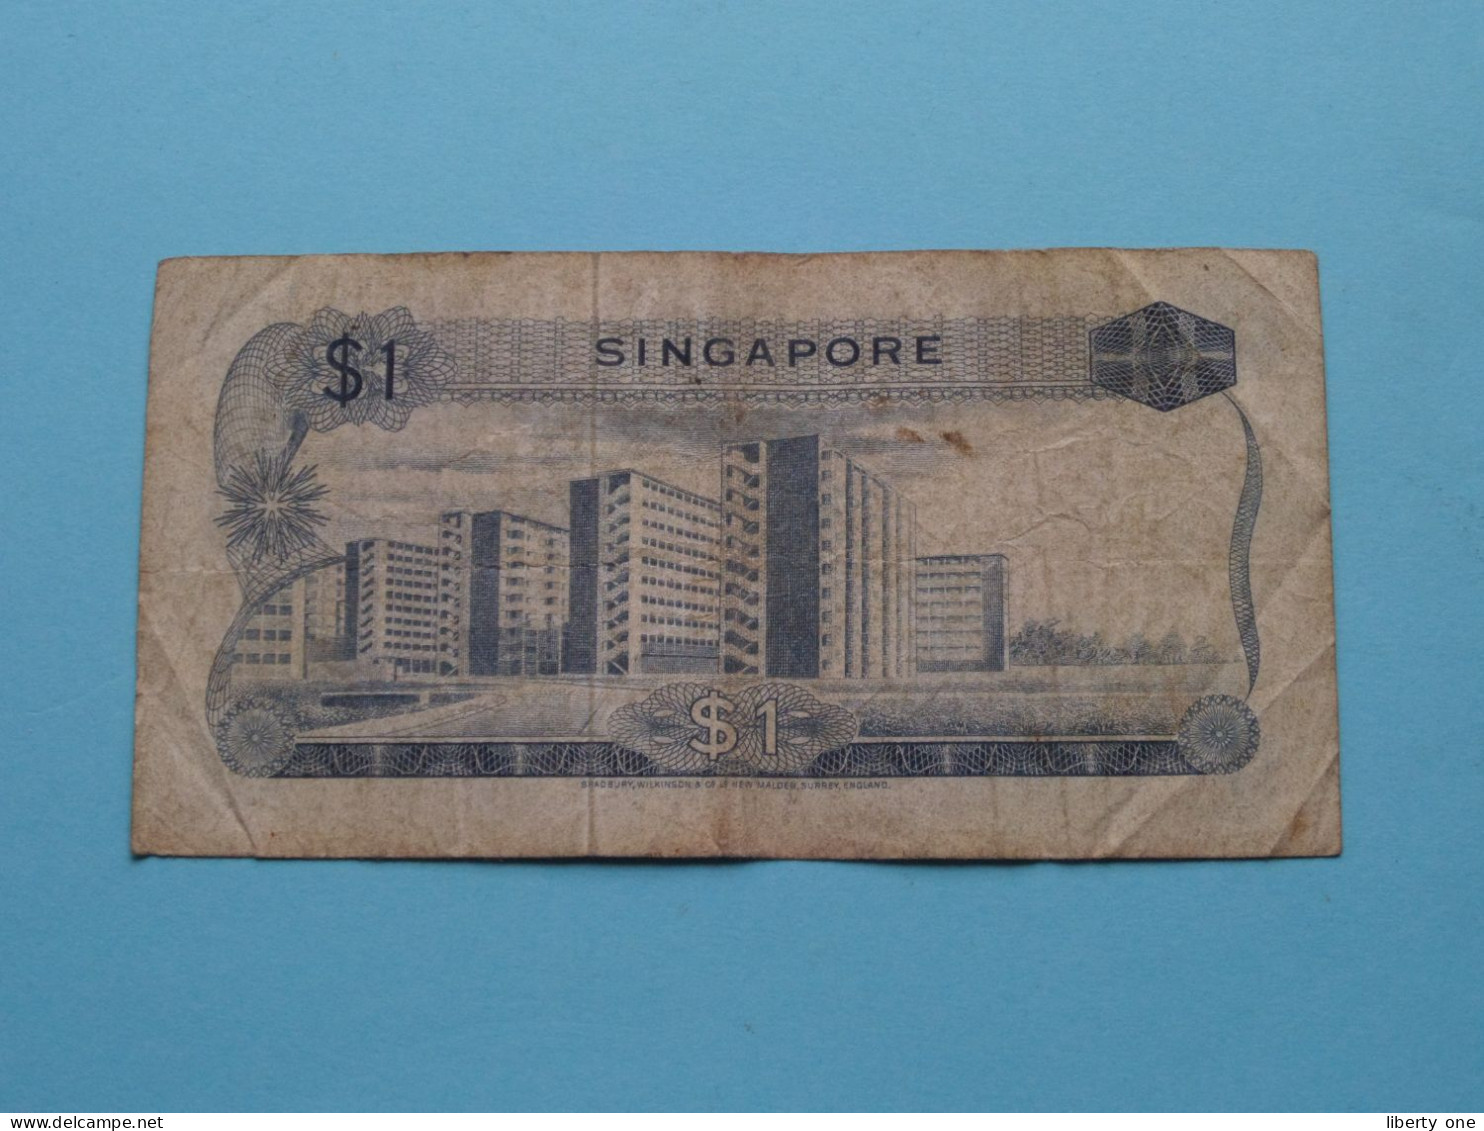 1 Dollar > Singapore ( See Scans ) Circulated ! - Singapour